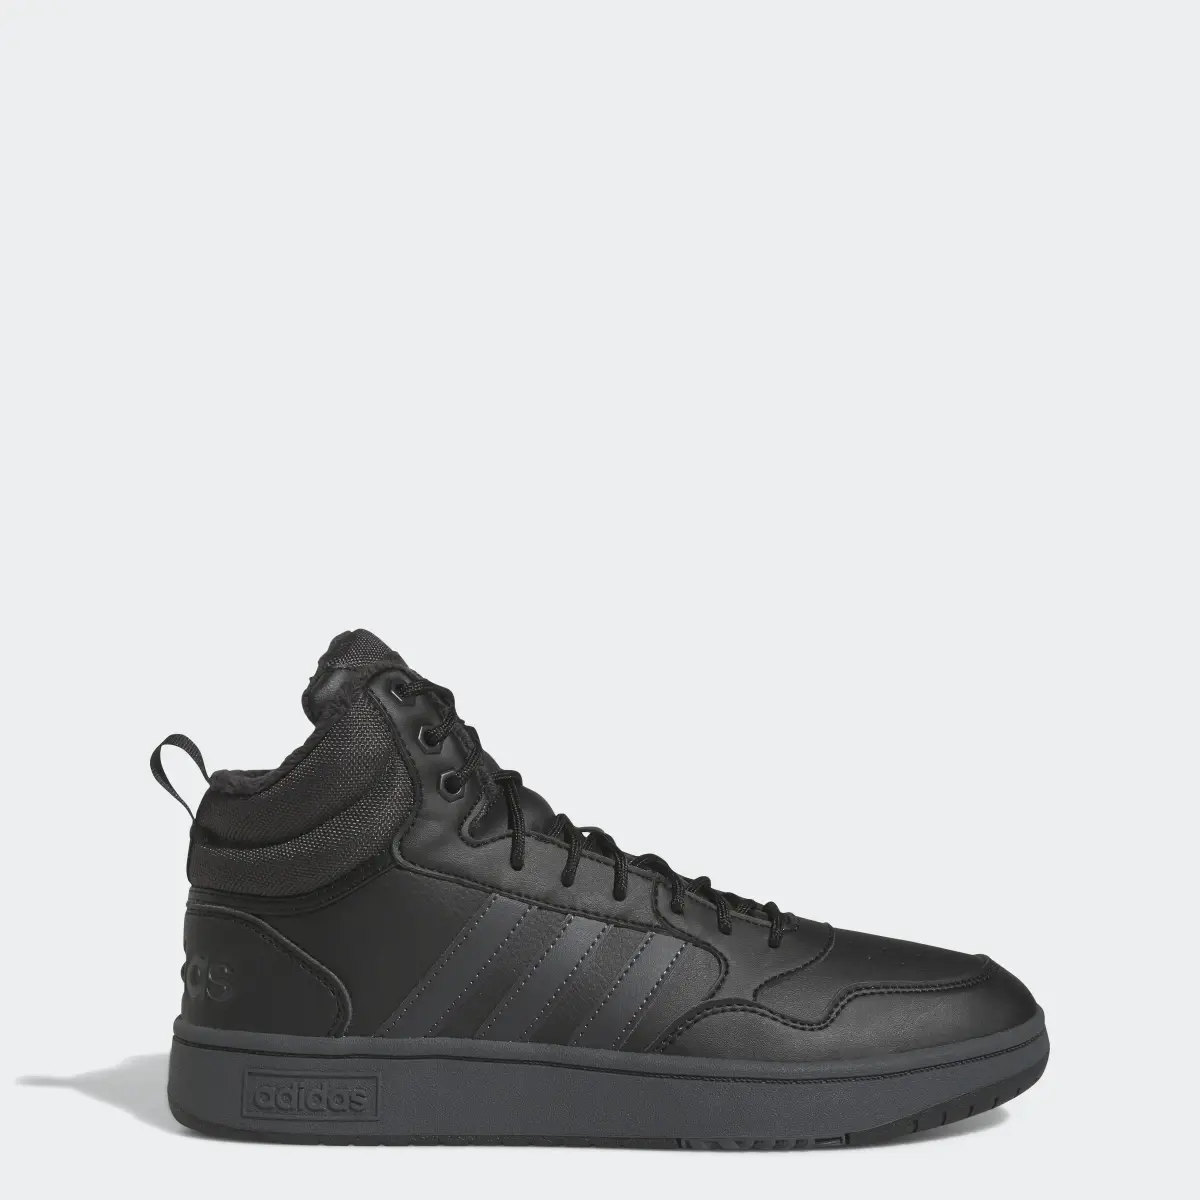 Adidas Chaussure Hoops 3.0 Mid Lifestyle Basketball Classic Fur Lining Winterized. 1